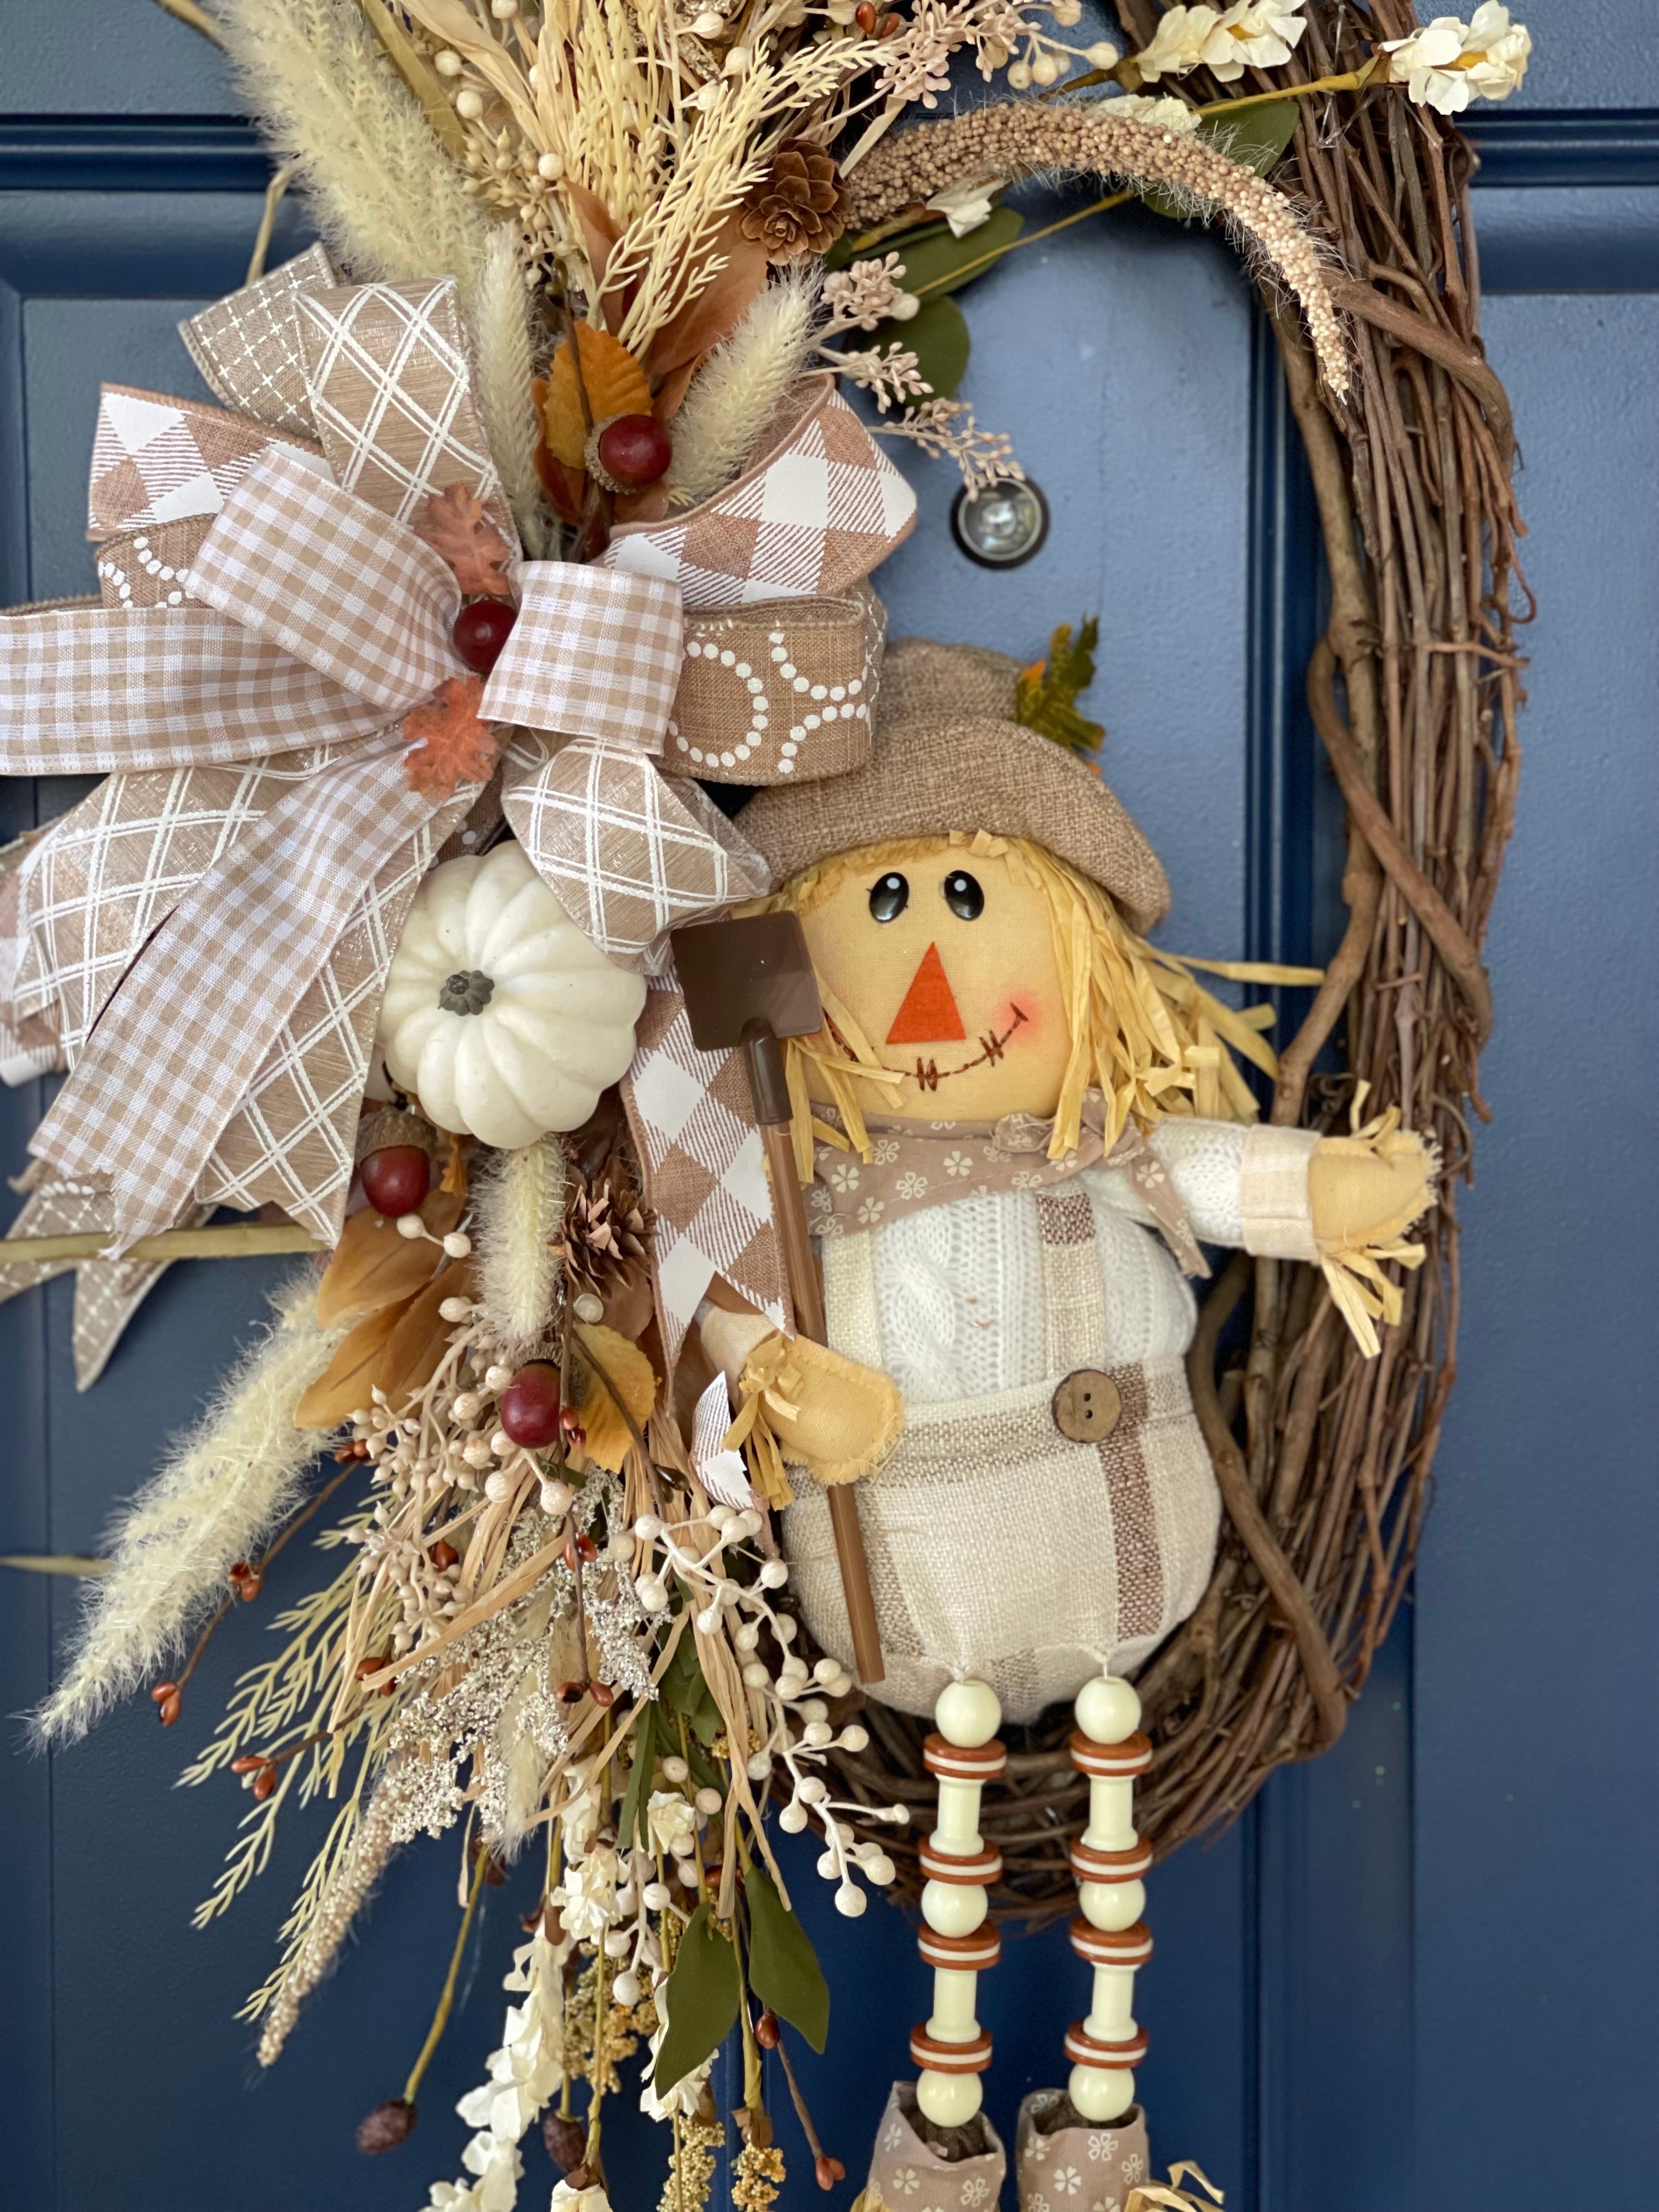 Plush Scarecrow with Shovel on a Grapevine wreath with White, Tan, and Light Brown Florals and Berries on a Blue Door